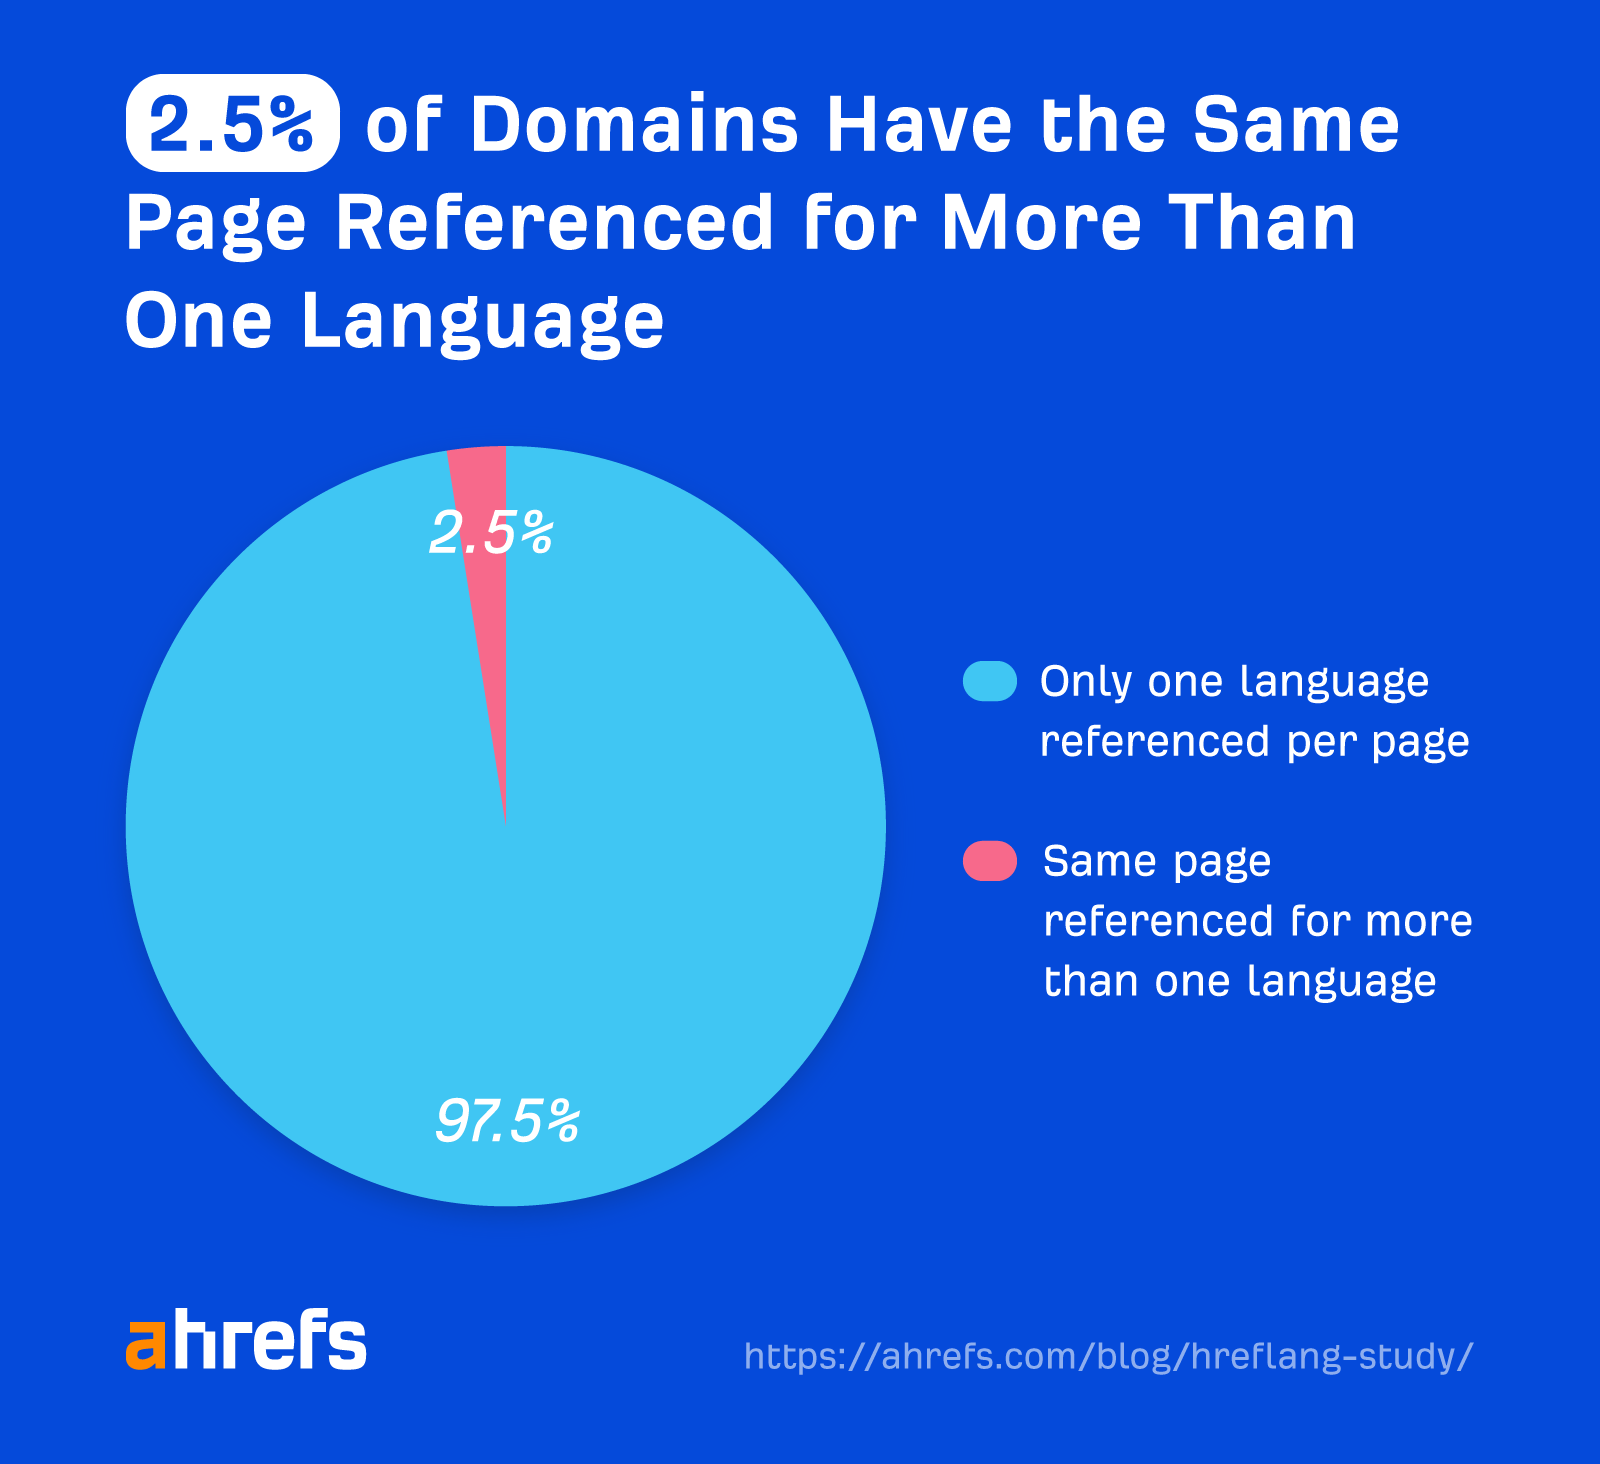 2.5% of domains have the same page referenced for more than one language